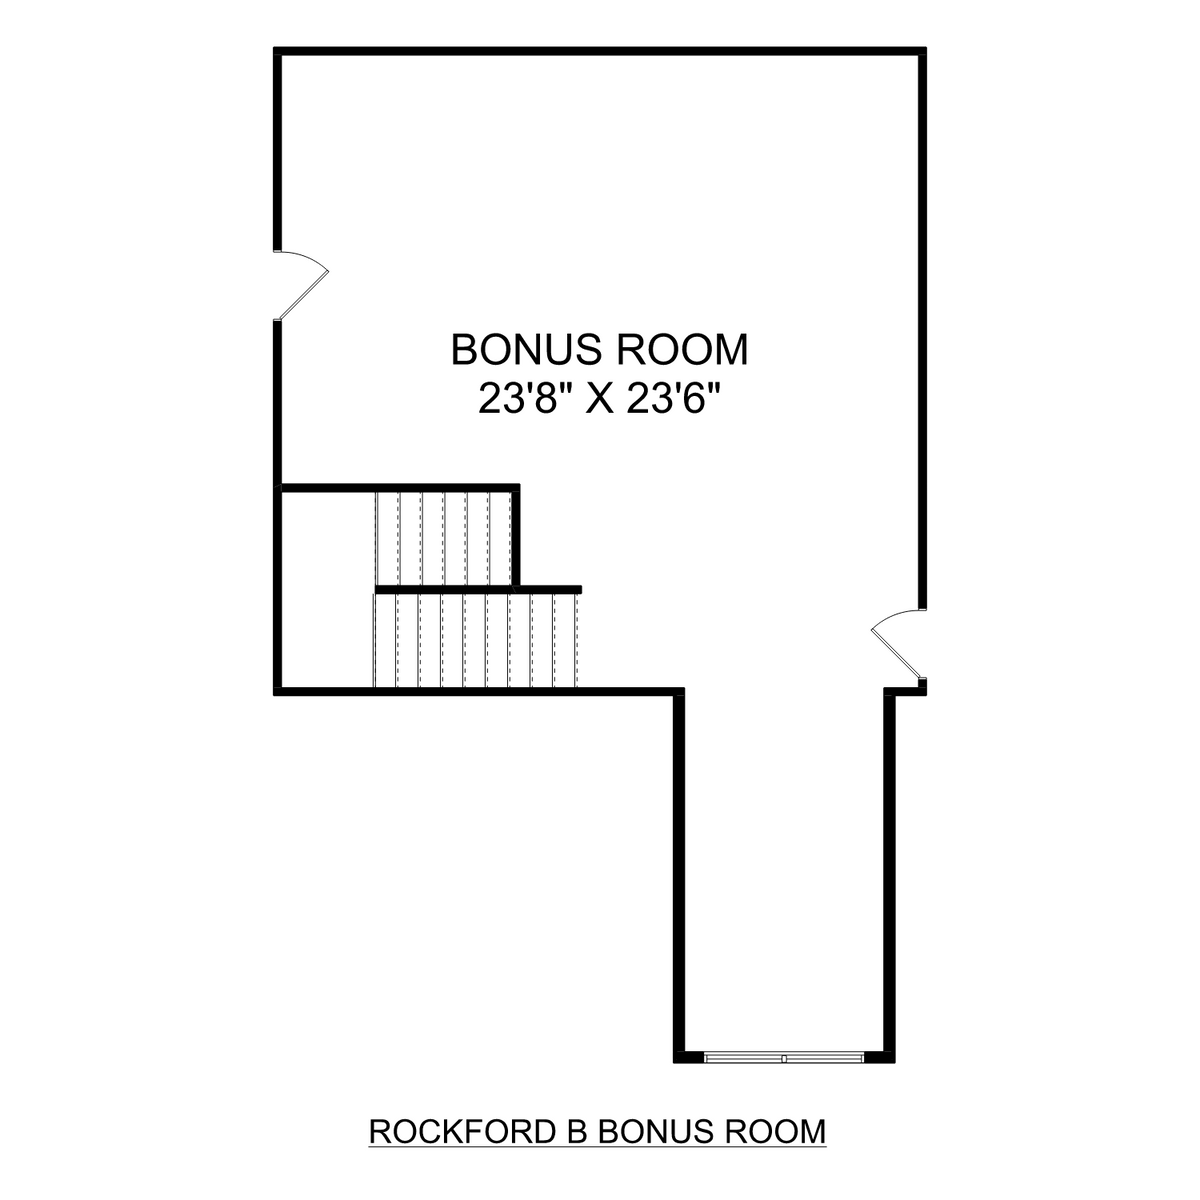 2 - The Rockford B with Bonus floor plan layout for 119 Scout Drive in Davidson Homes' Barnett's Crossing community.